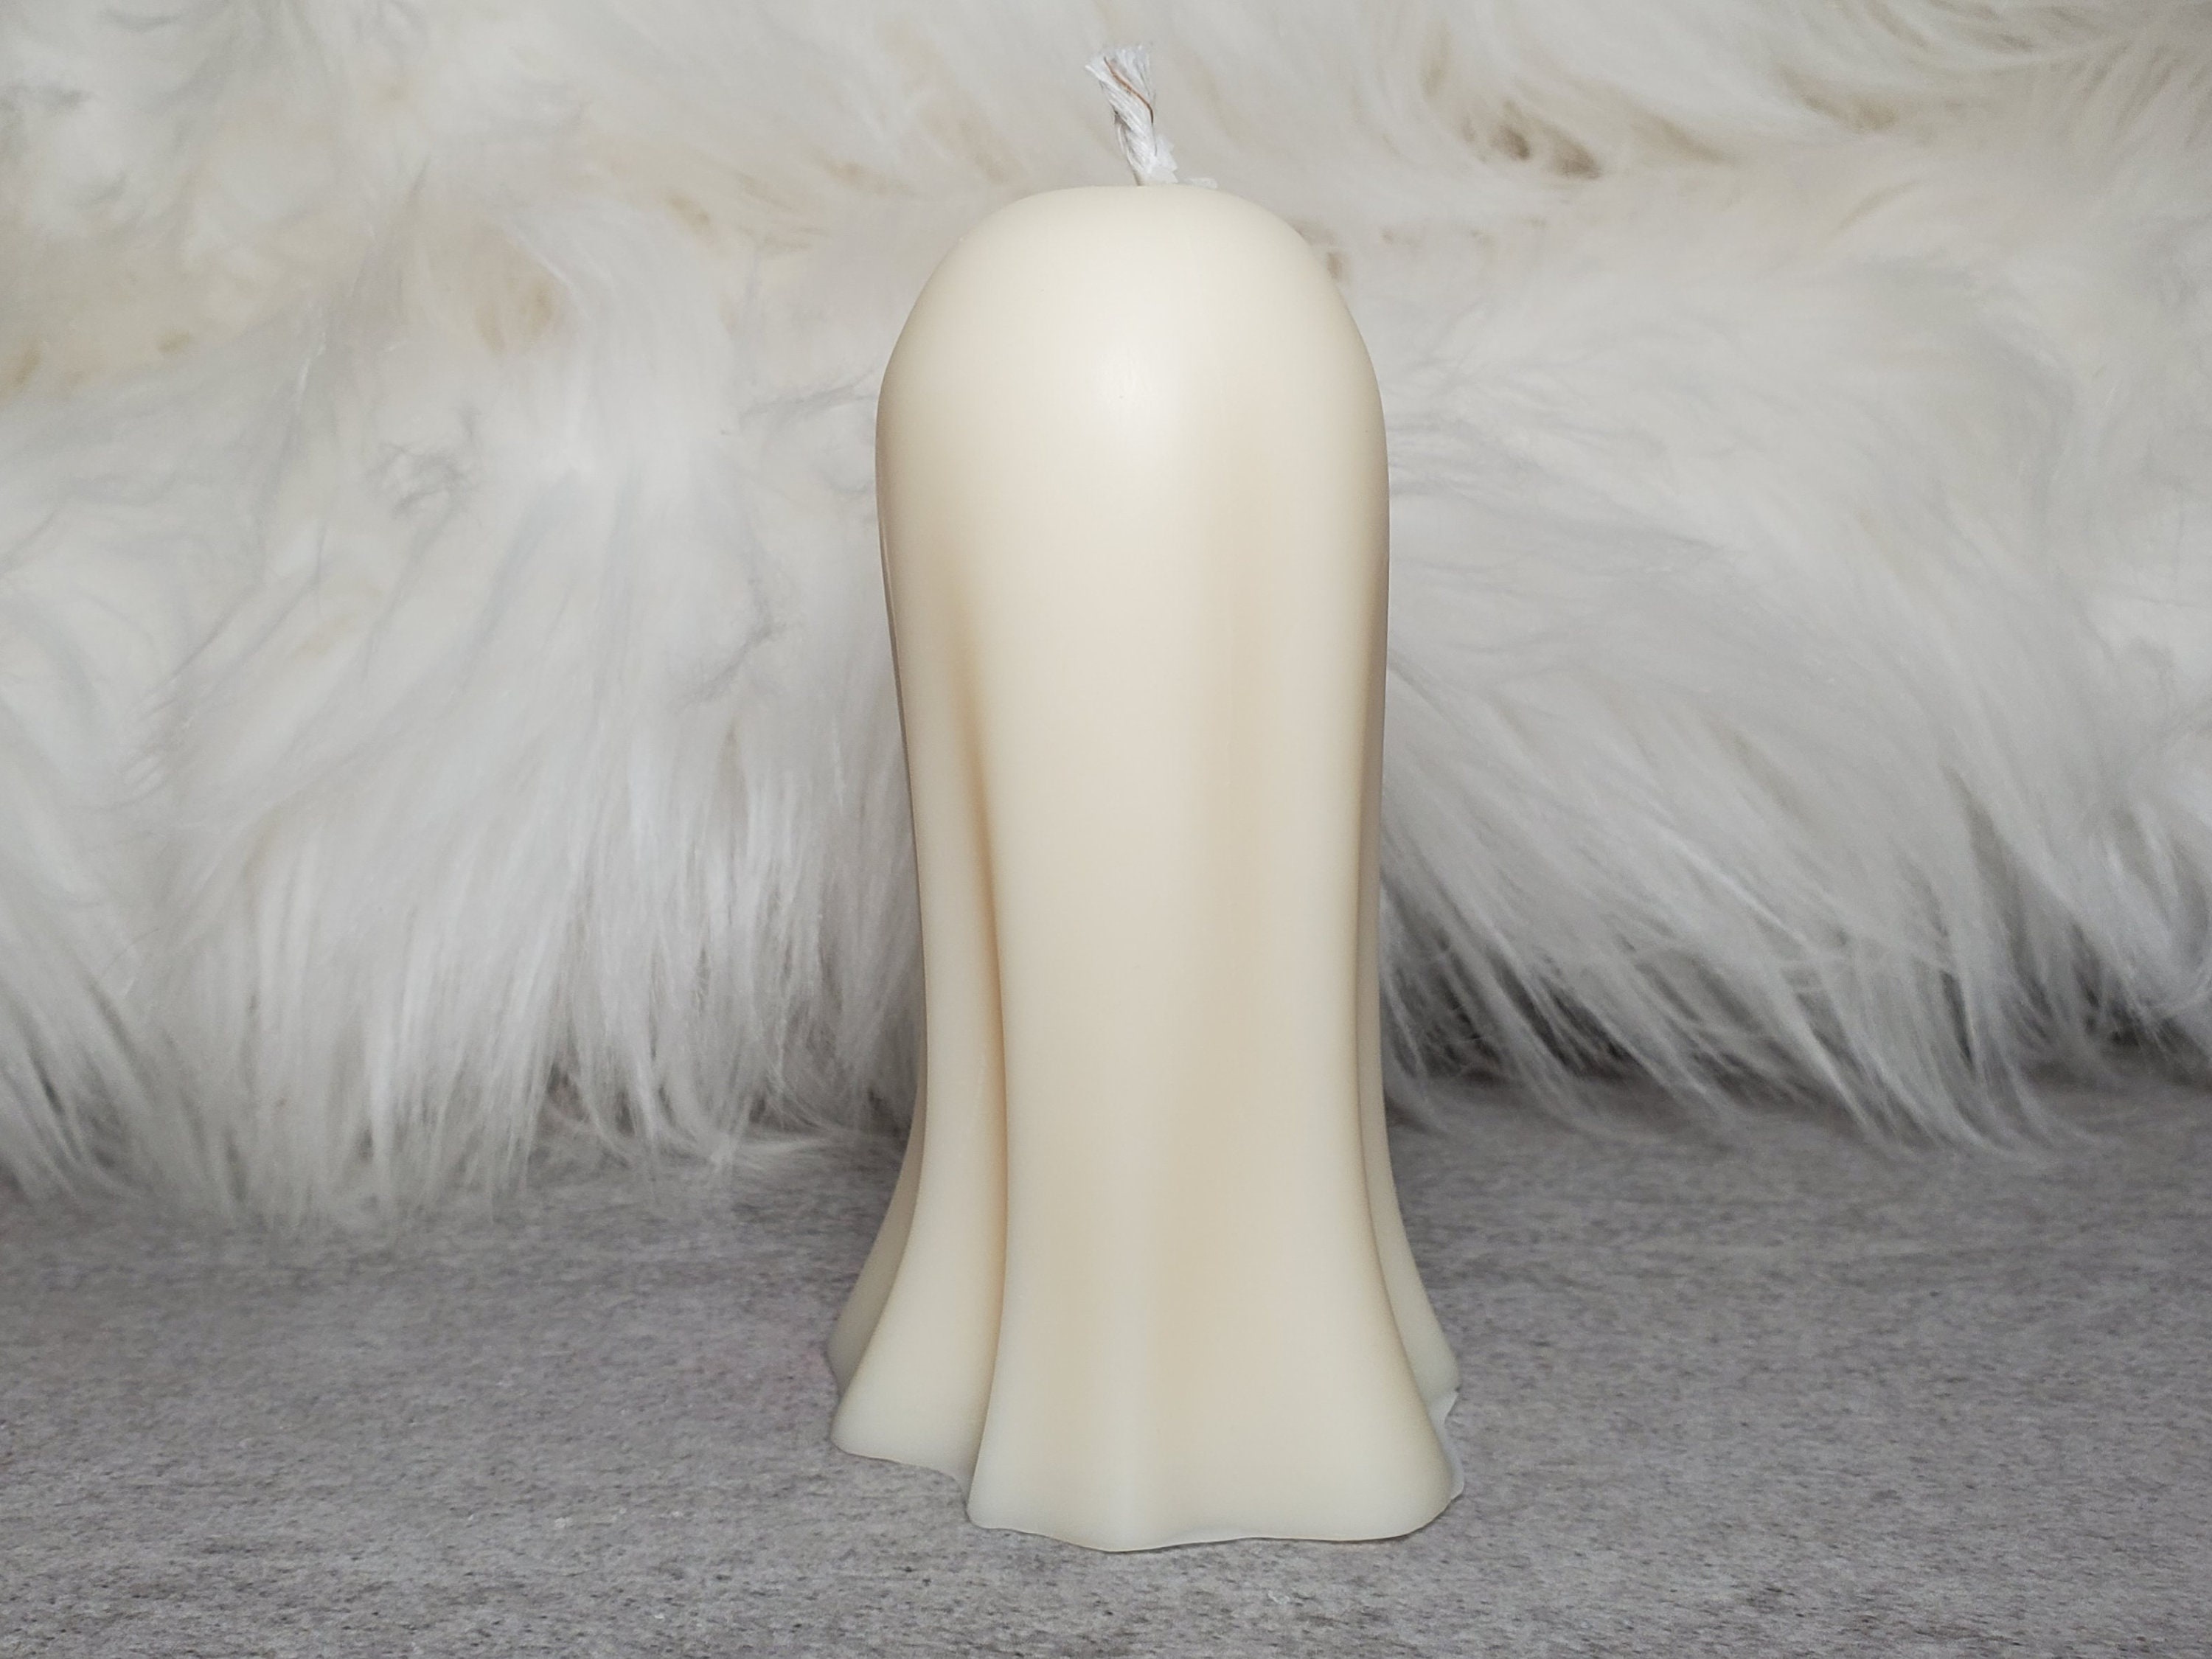 Textured Pitcher candle for wax play [choose your wax color] 3.5oz, soy wax.